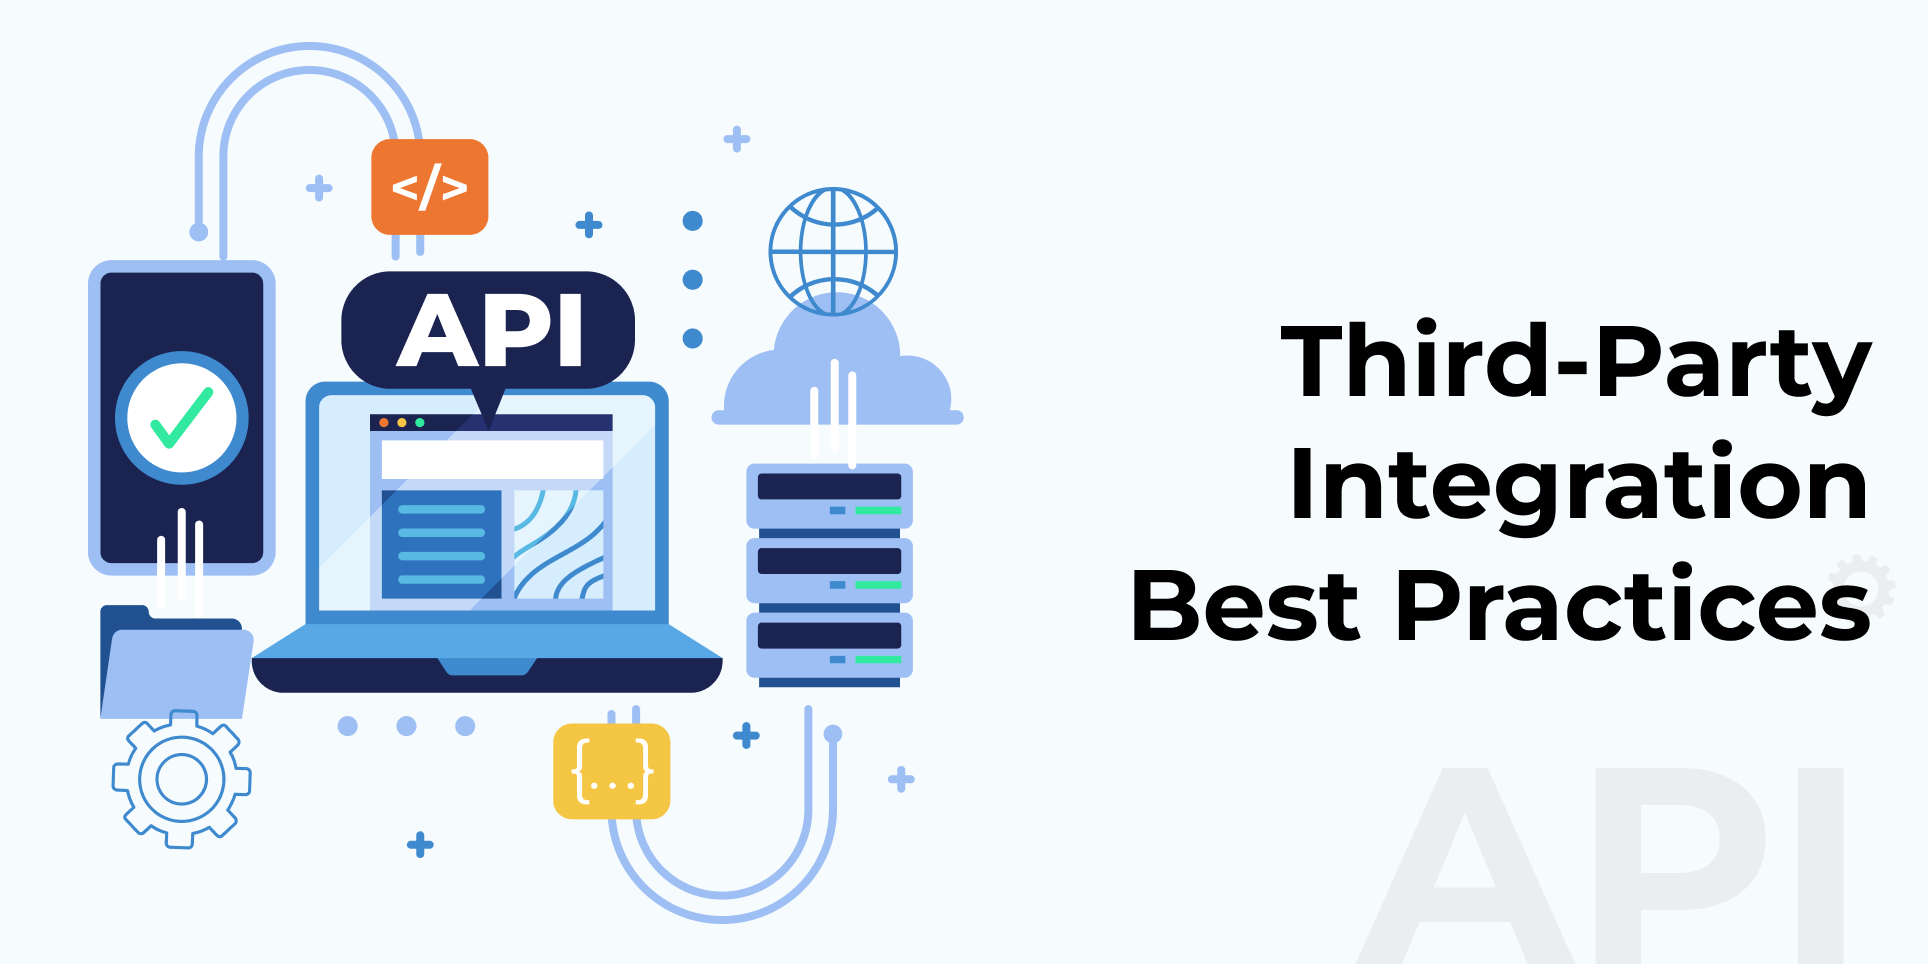 Third-Party Integration Best Practices